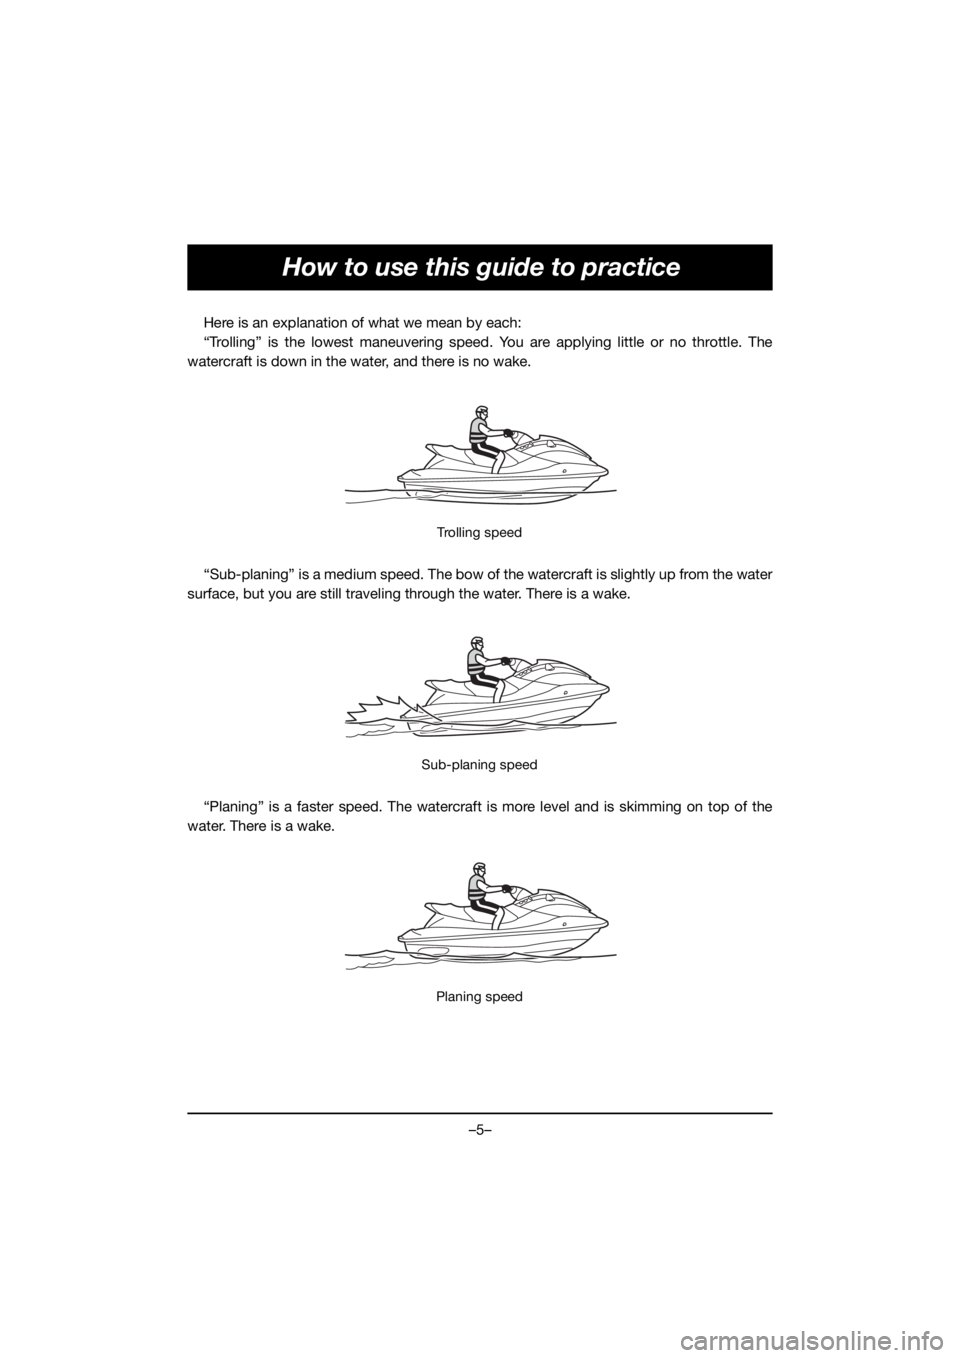 YAMAHA GP1800R SVHO 2020  Manual de utilização (in Portuguese) –5–
How to use this guide to practice
Here is an explanation of what we mean by each:
“Trolling” is the lowest maneuvering speed. You are applying little or no throttle. The
watercraft is down